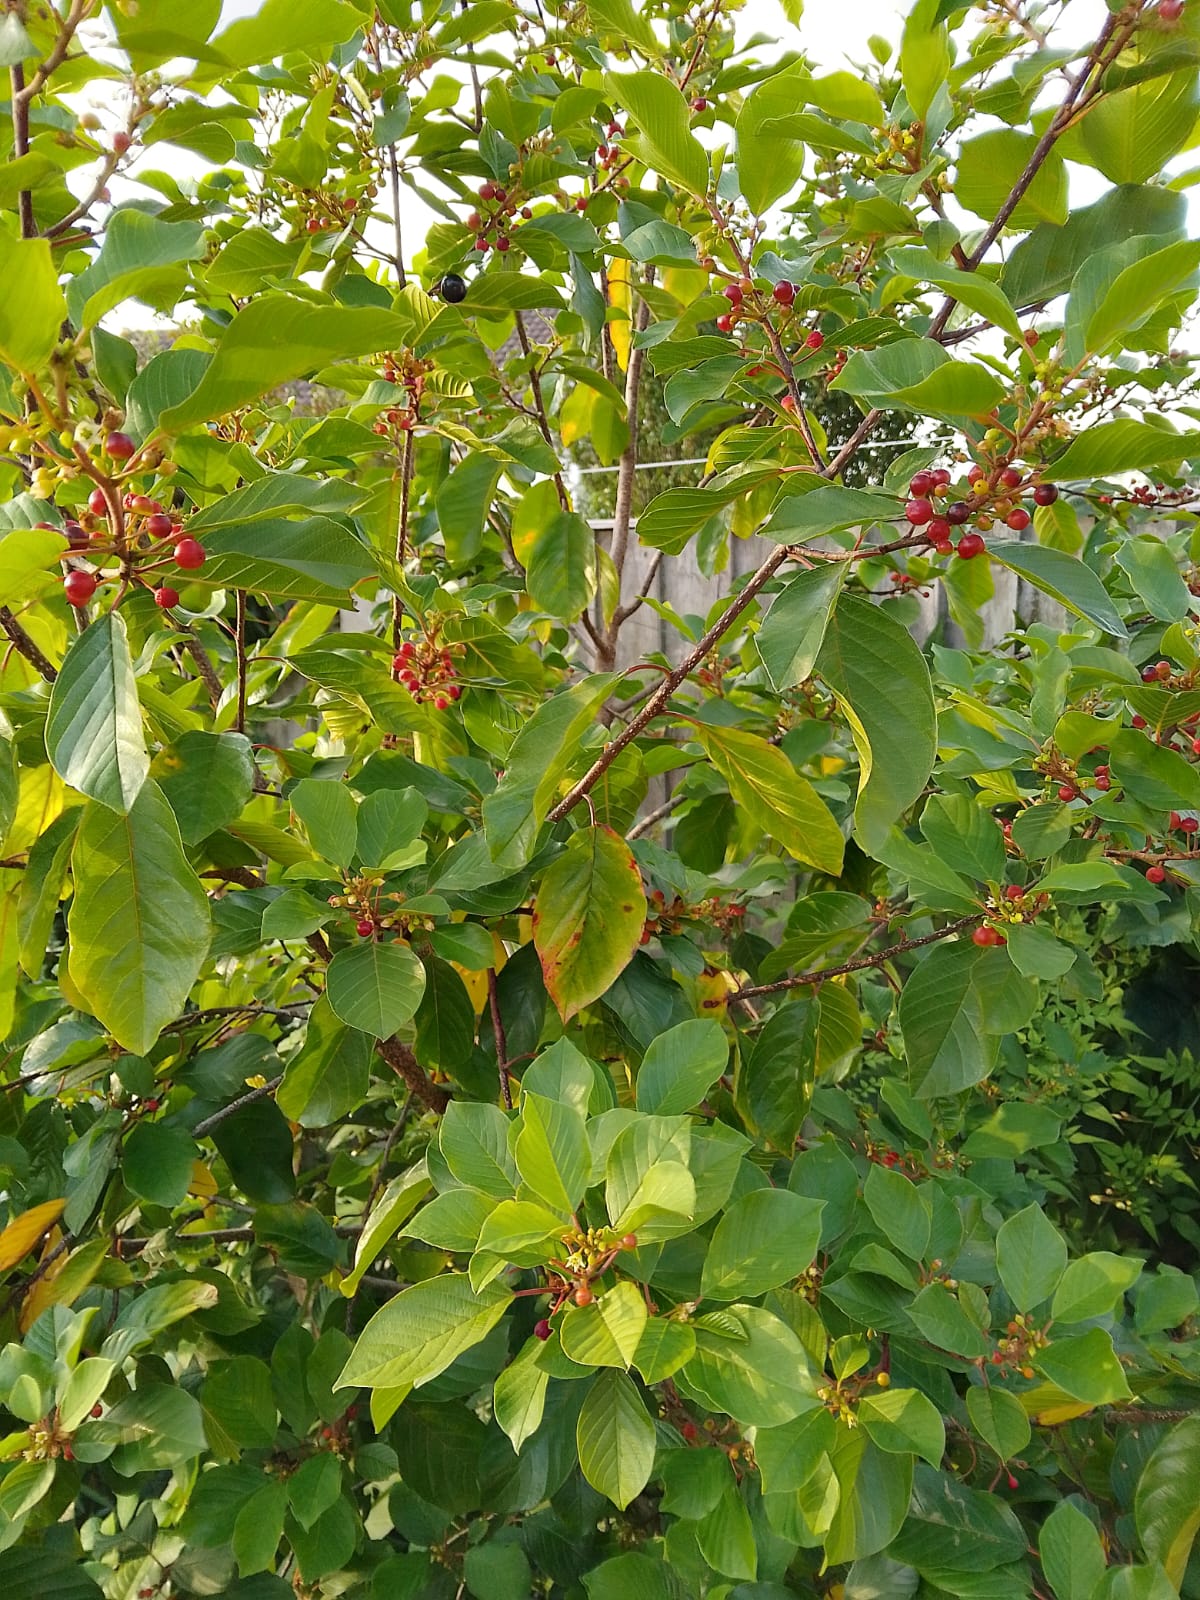 Alder buckthorn with flowers and berries